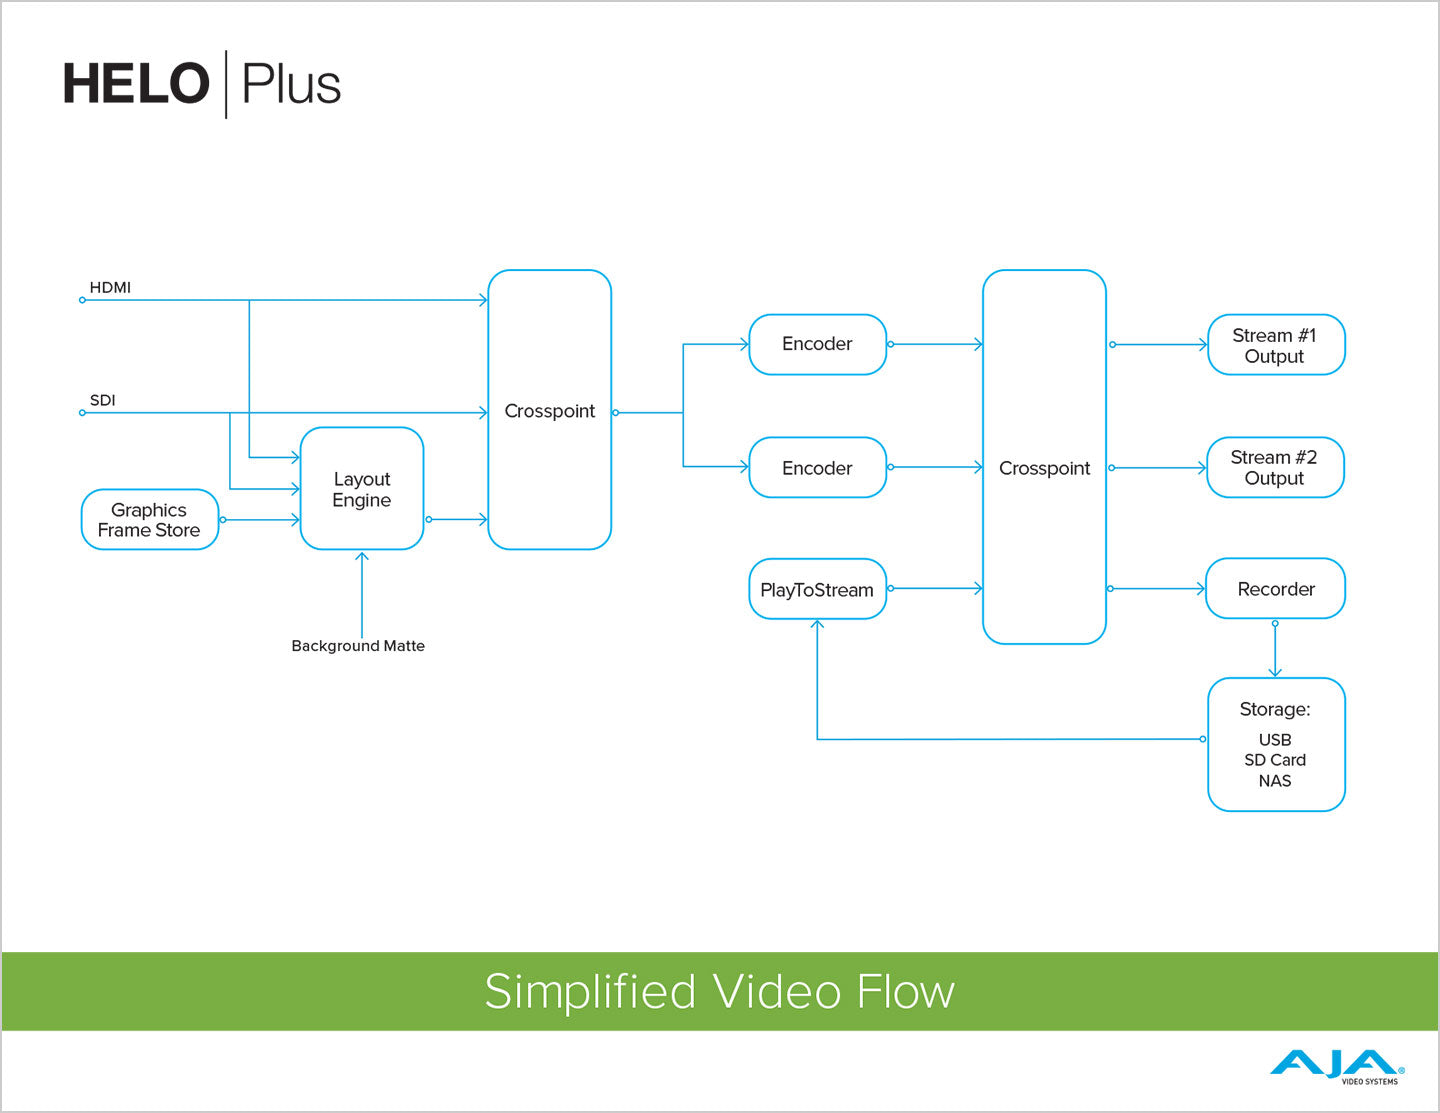 Simple but Flexible The simplified signal flow for video within HELO Plus neatly highlights the flexibility of the device. Tracing a simple pathway for each video input illustrates the encoder, graphics, recording, and new PlayToStream options.